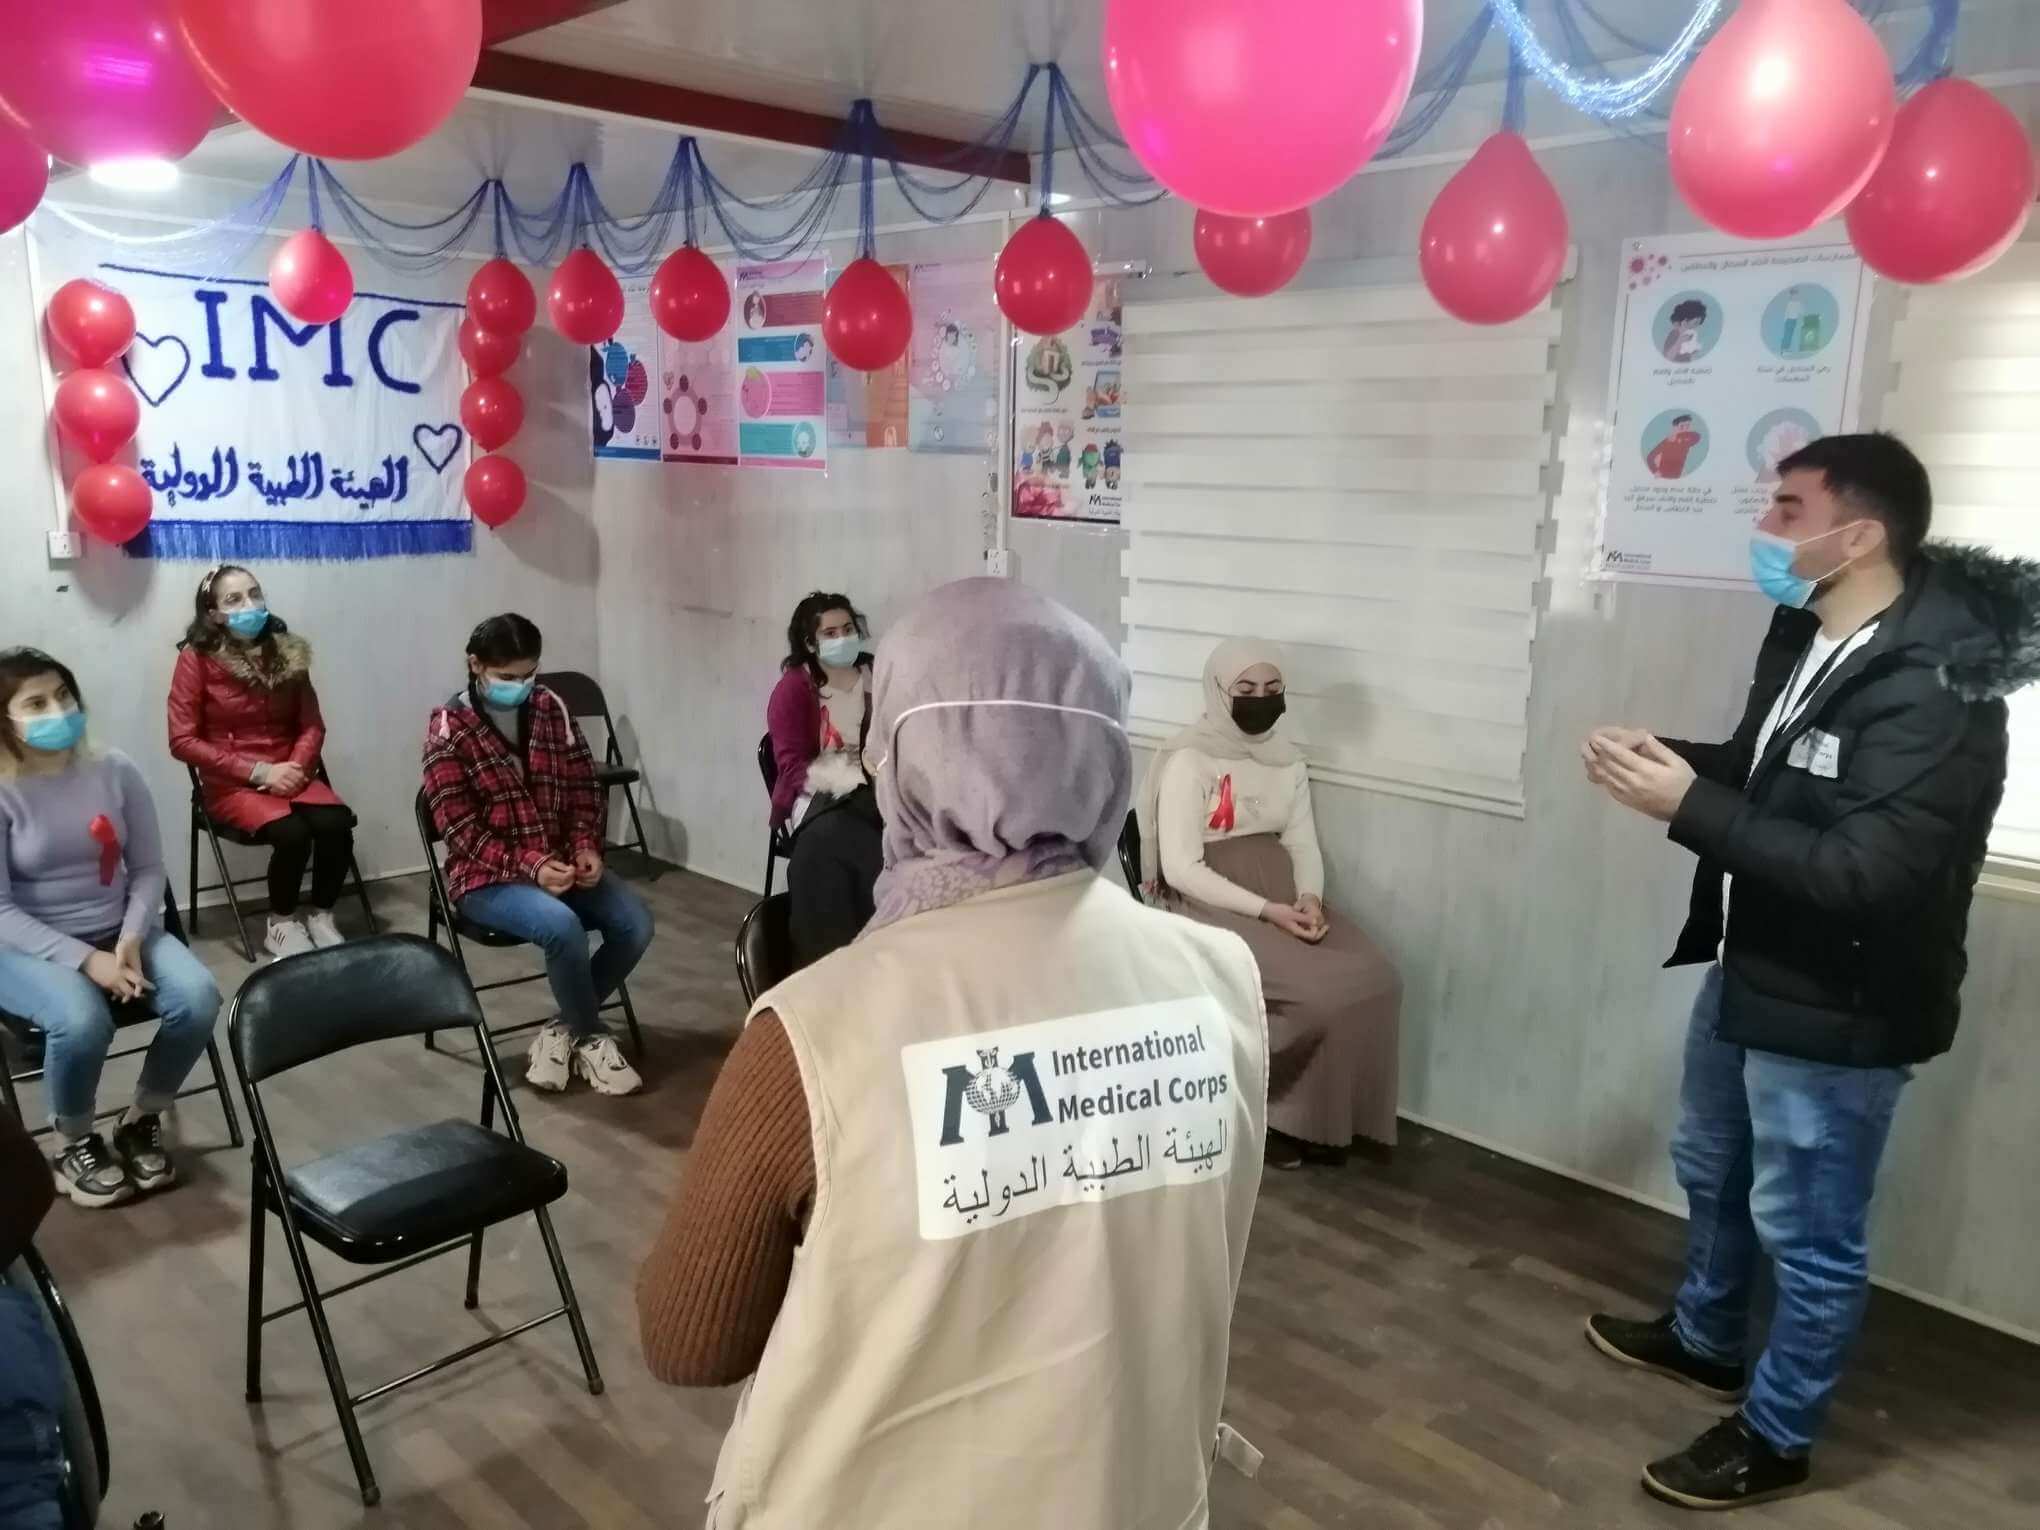 Our team at the Domiz refugee camp in Iraq hosted awareness sessions activities during 16 Days